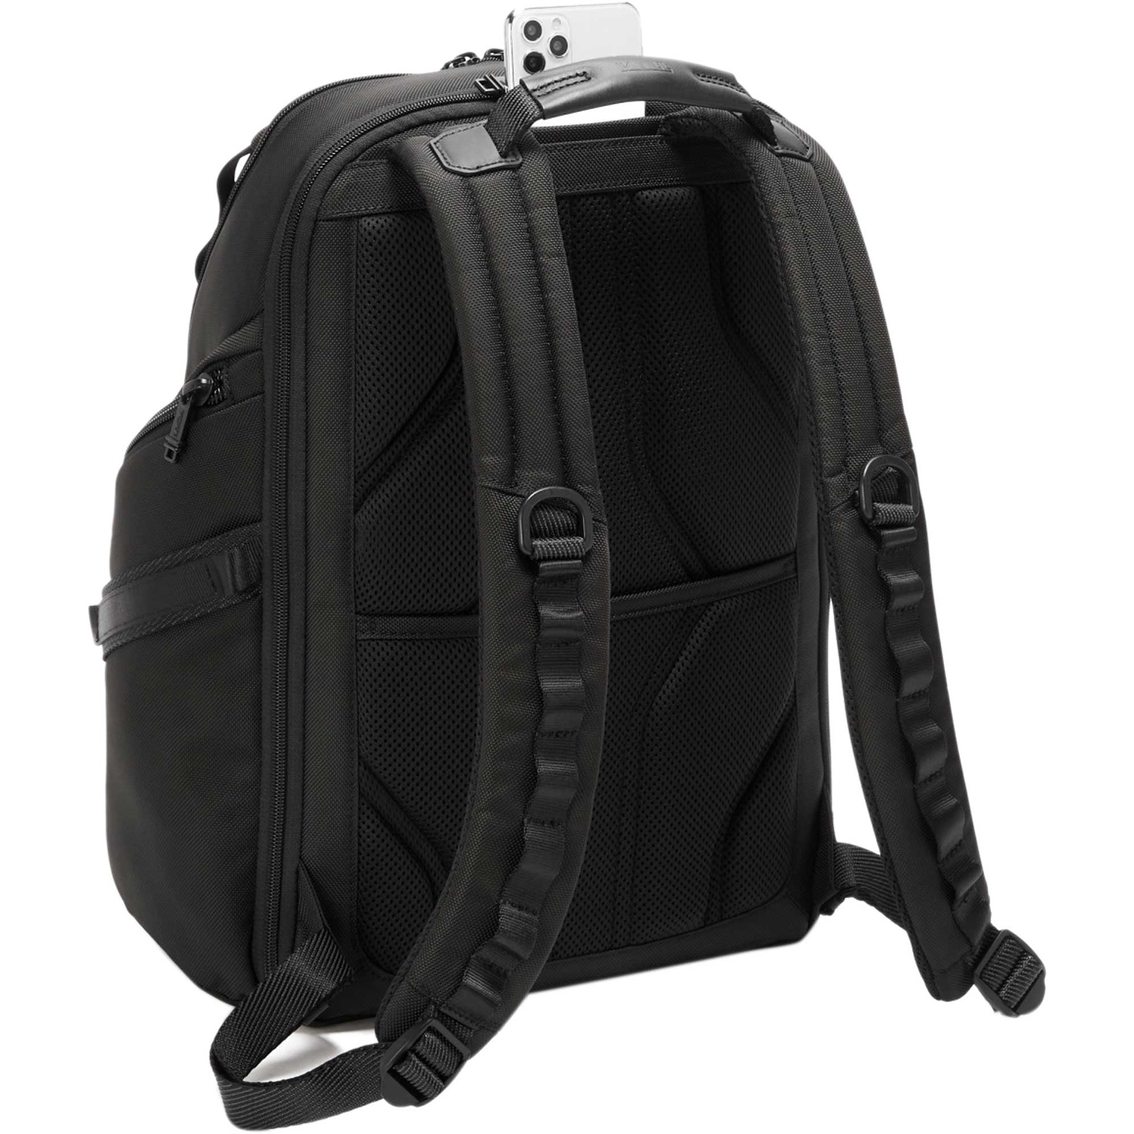 Tumi Search Backpack, Black - Image 2 of 6